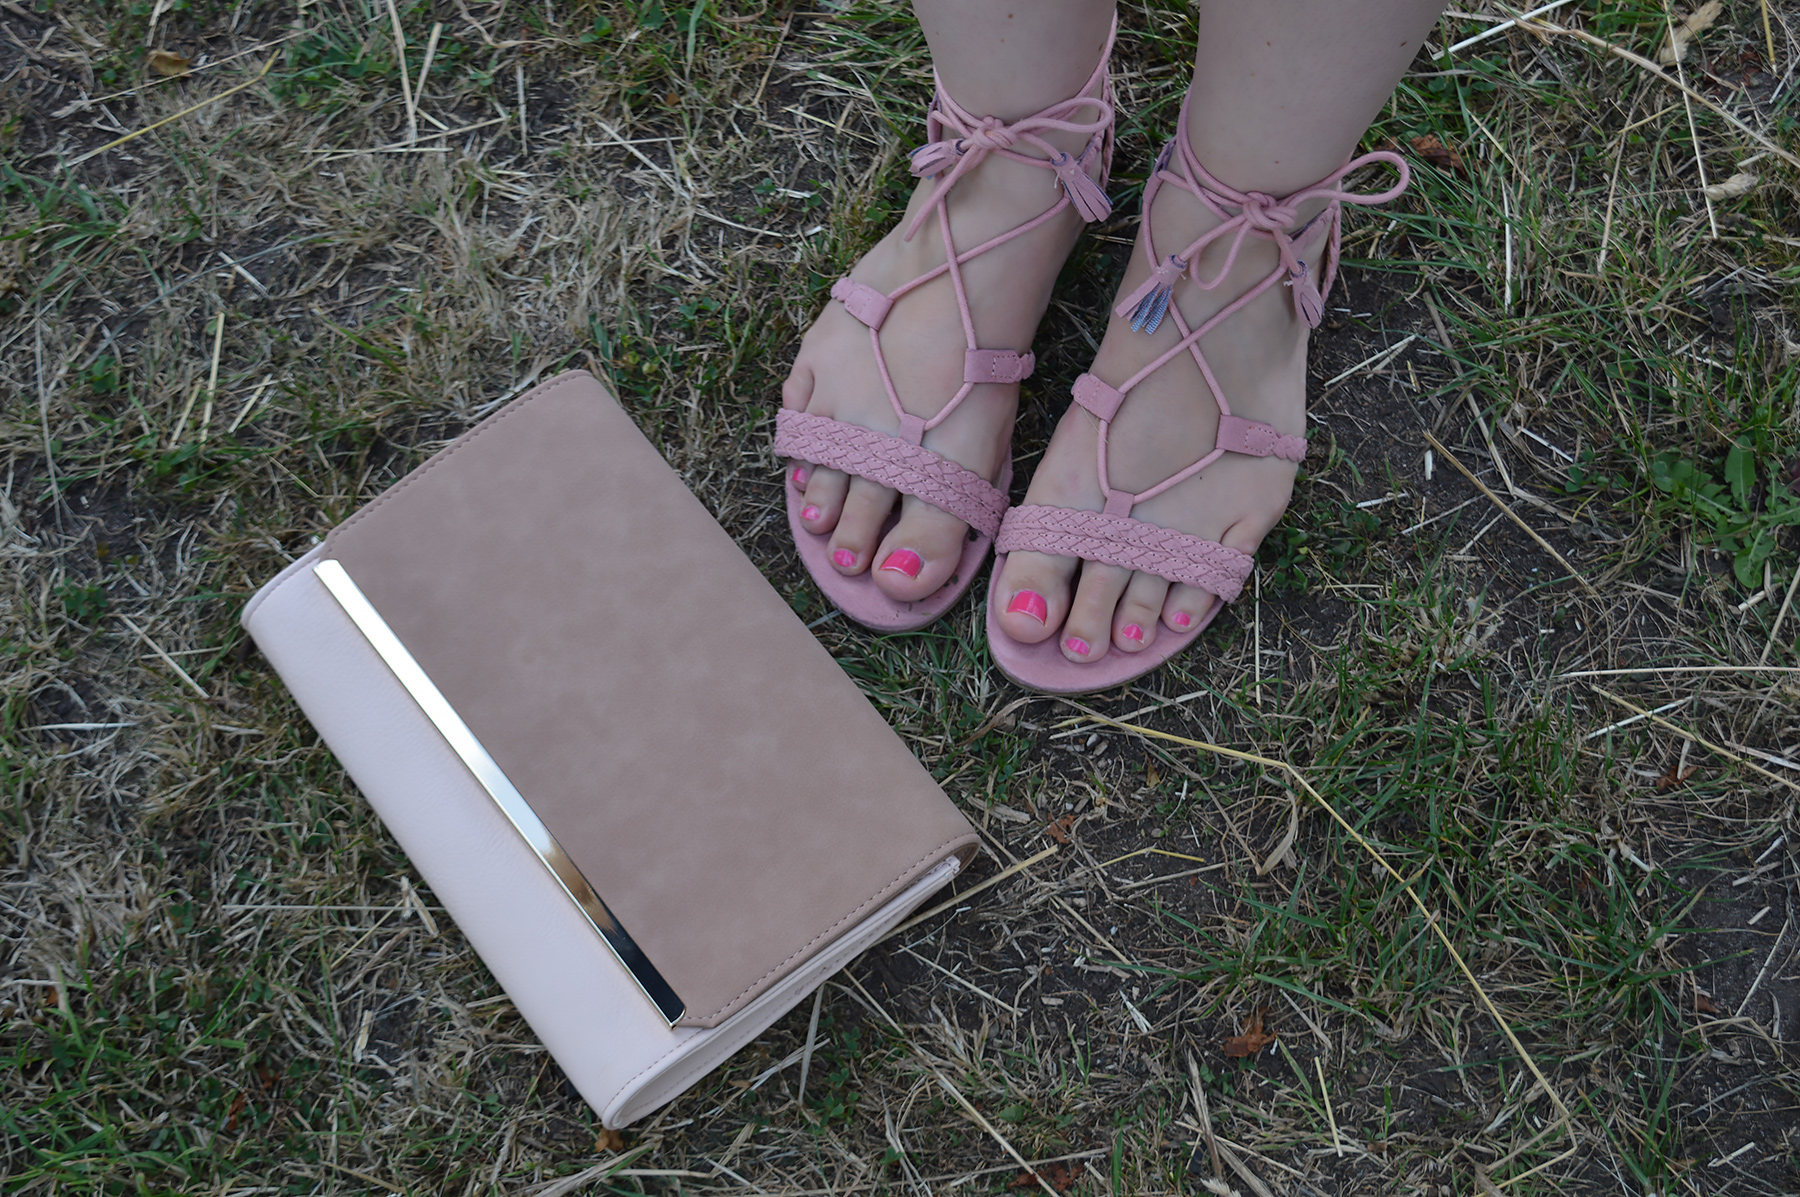 Lasula Boutique Lace Up Sandals and Laura Ashley Clutch